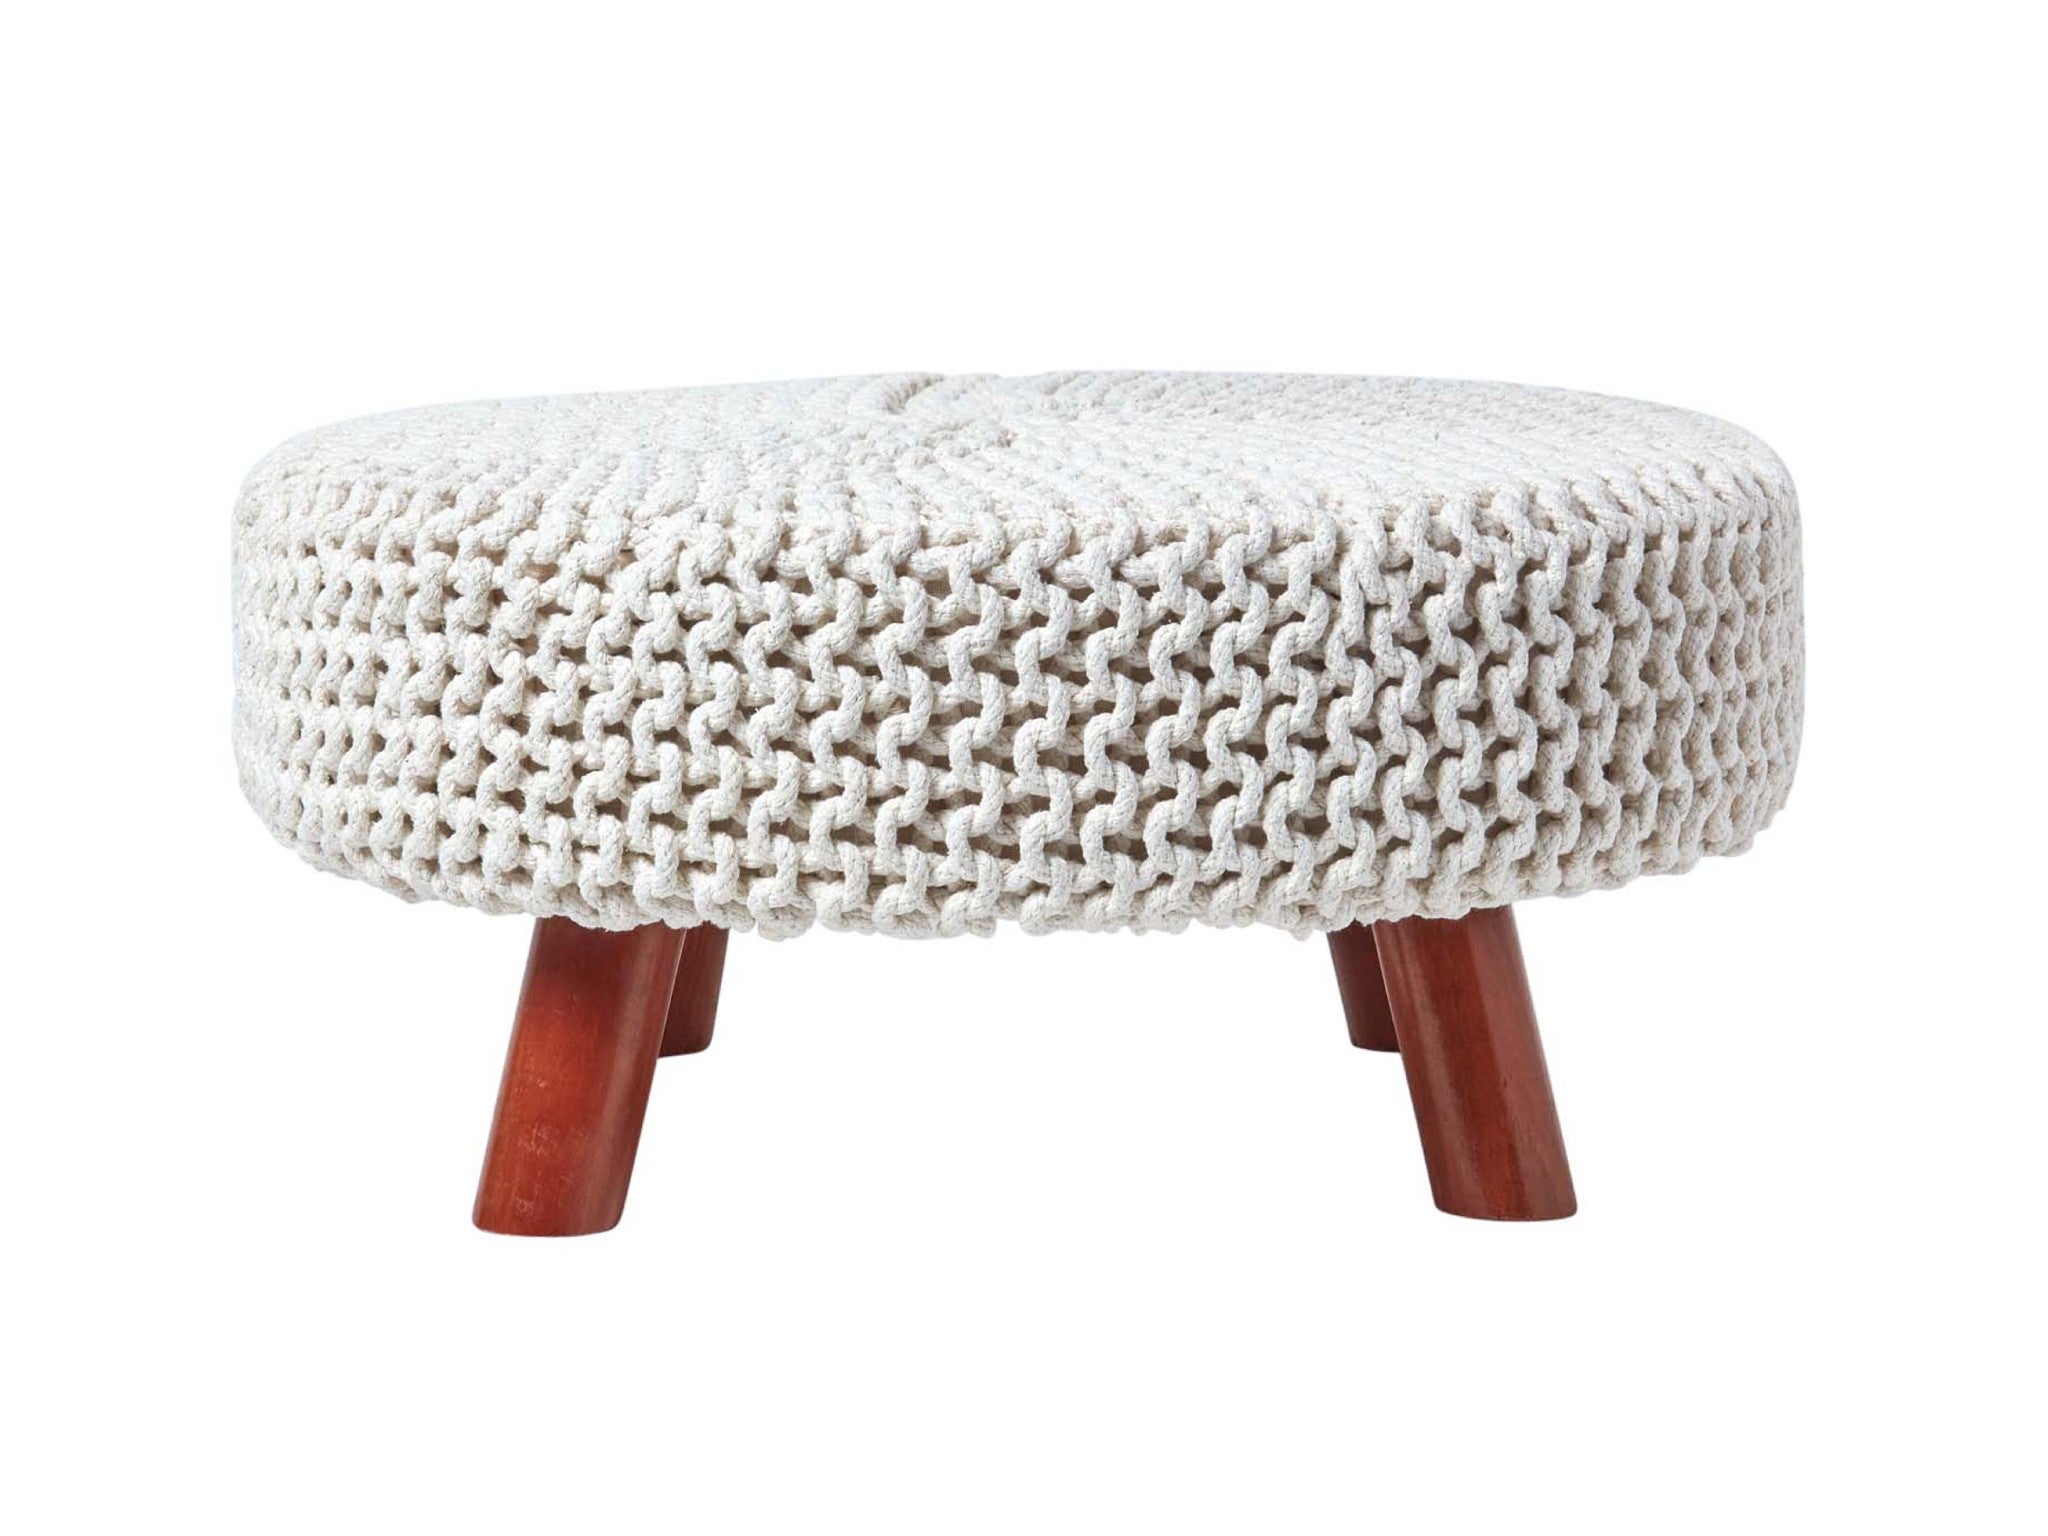 Homescapes natural knitted flat footstool with wooden large legs indybest.jpg